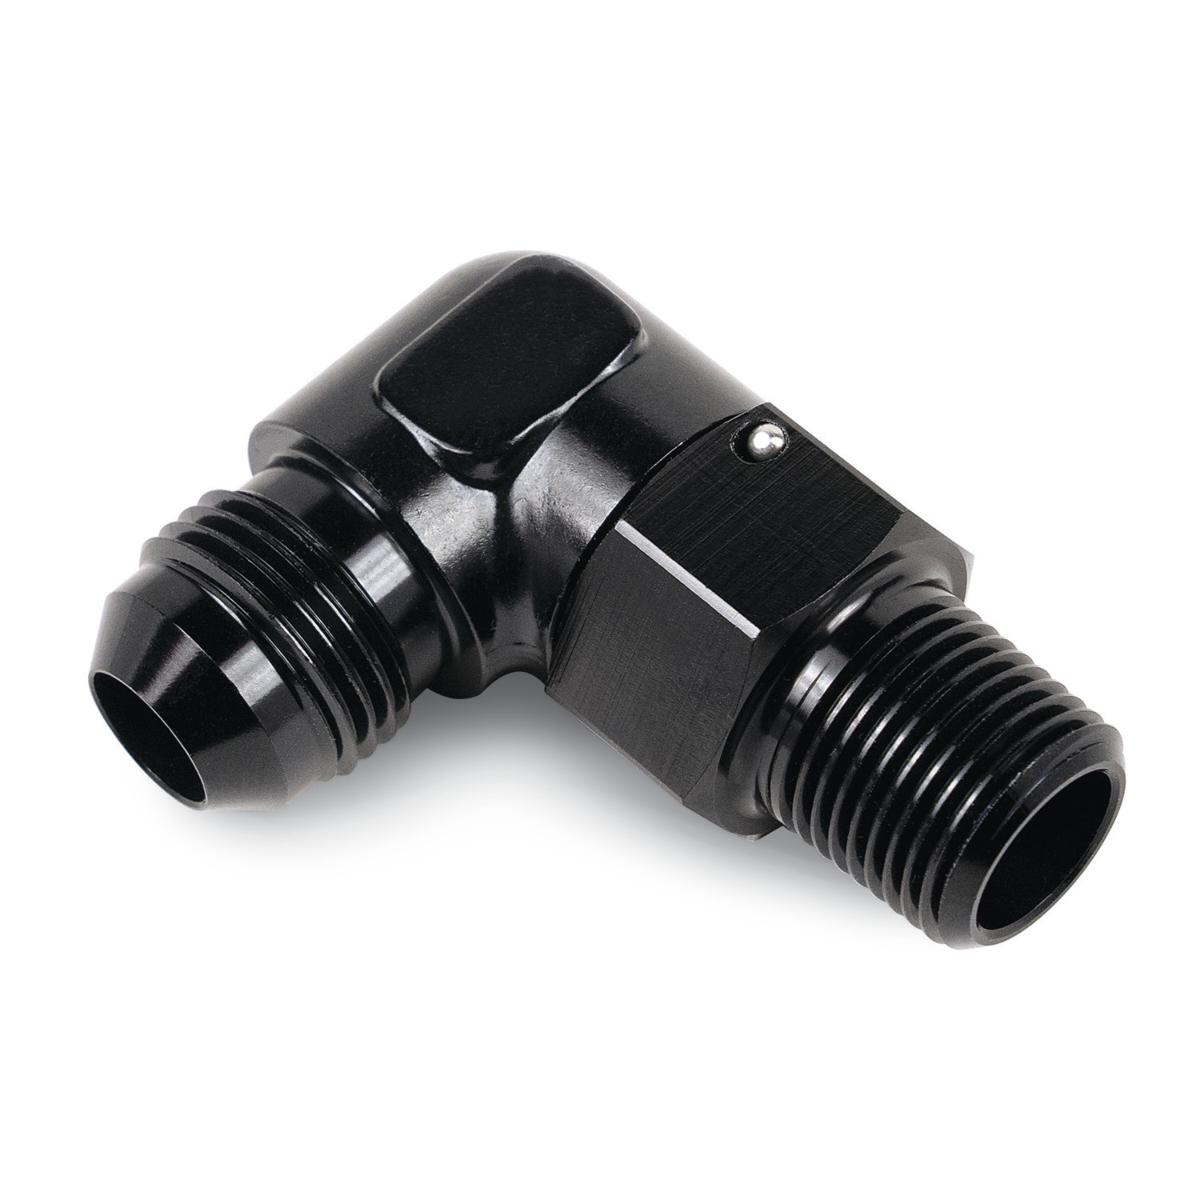 Derale 59708 Fitting, Adapter, 90 Degree, 1/2 in NPT Male to 8 AN Male, Aluminum, Black Anodized, Each